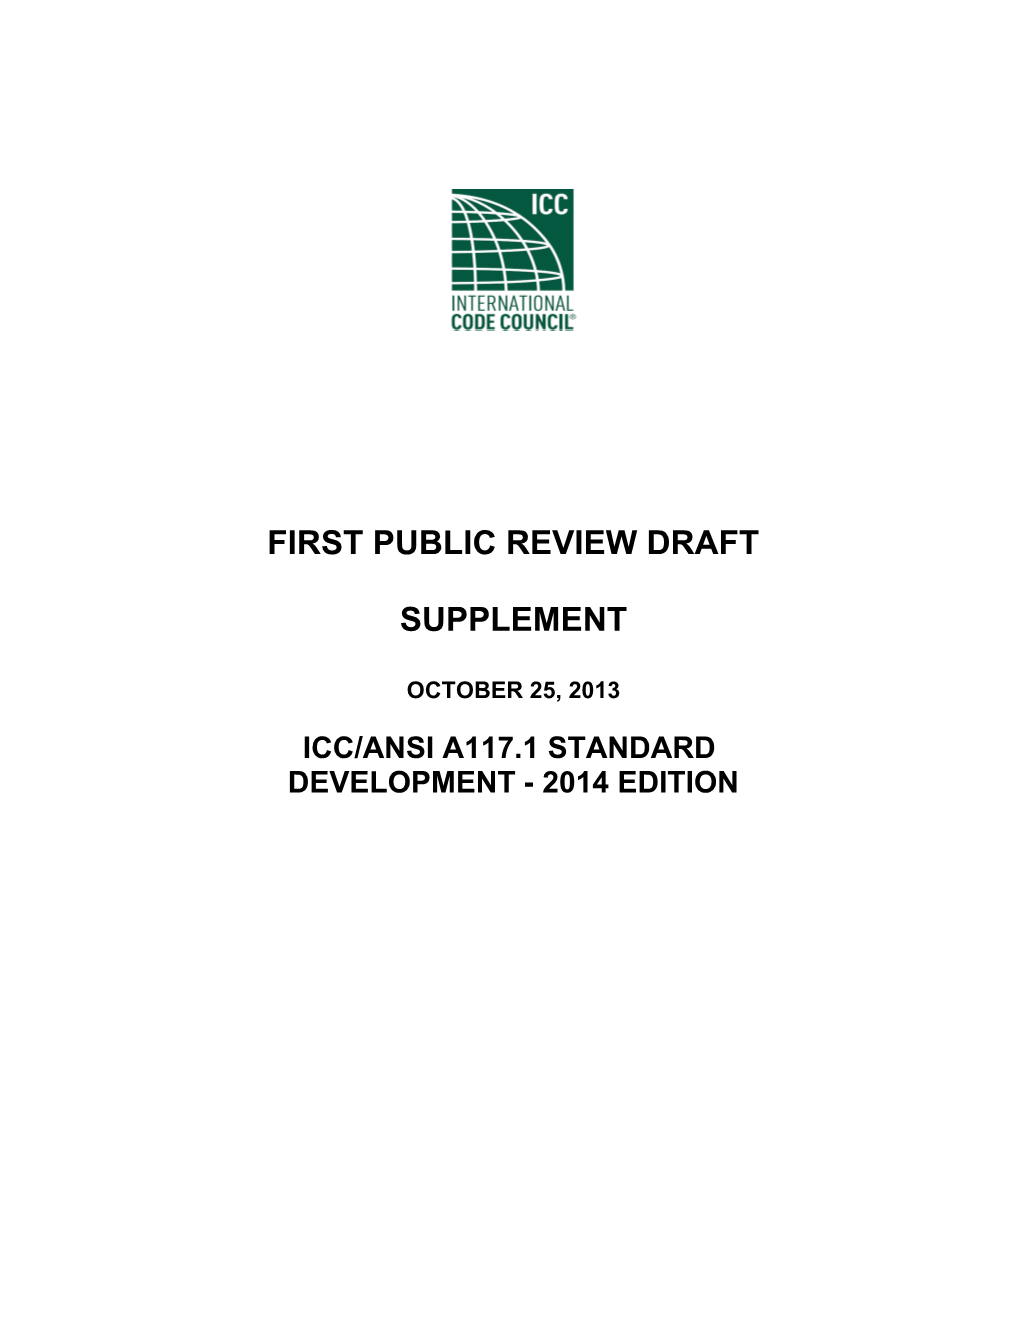 First Public Review Draft Supplement